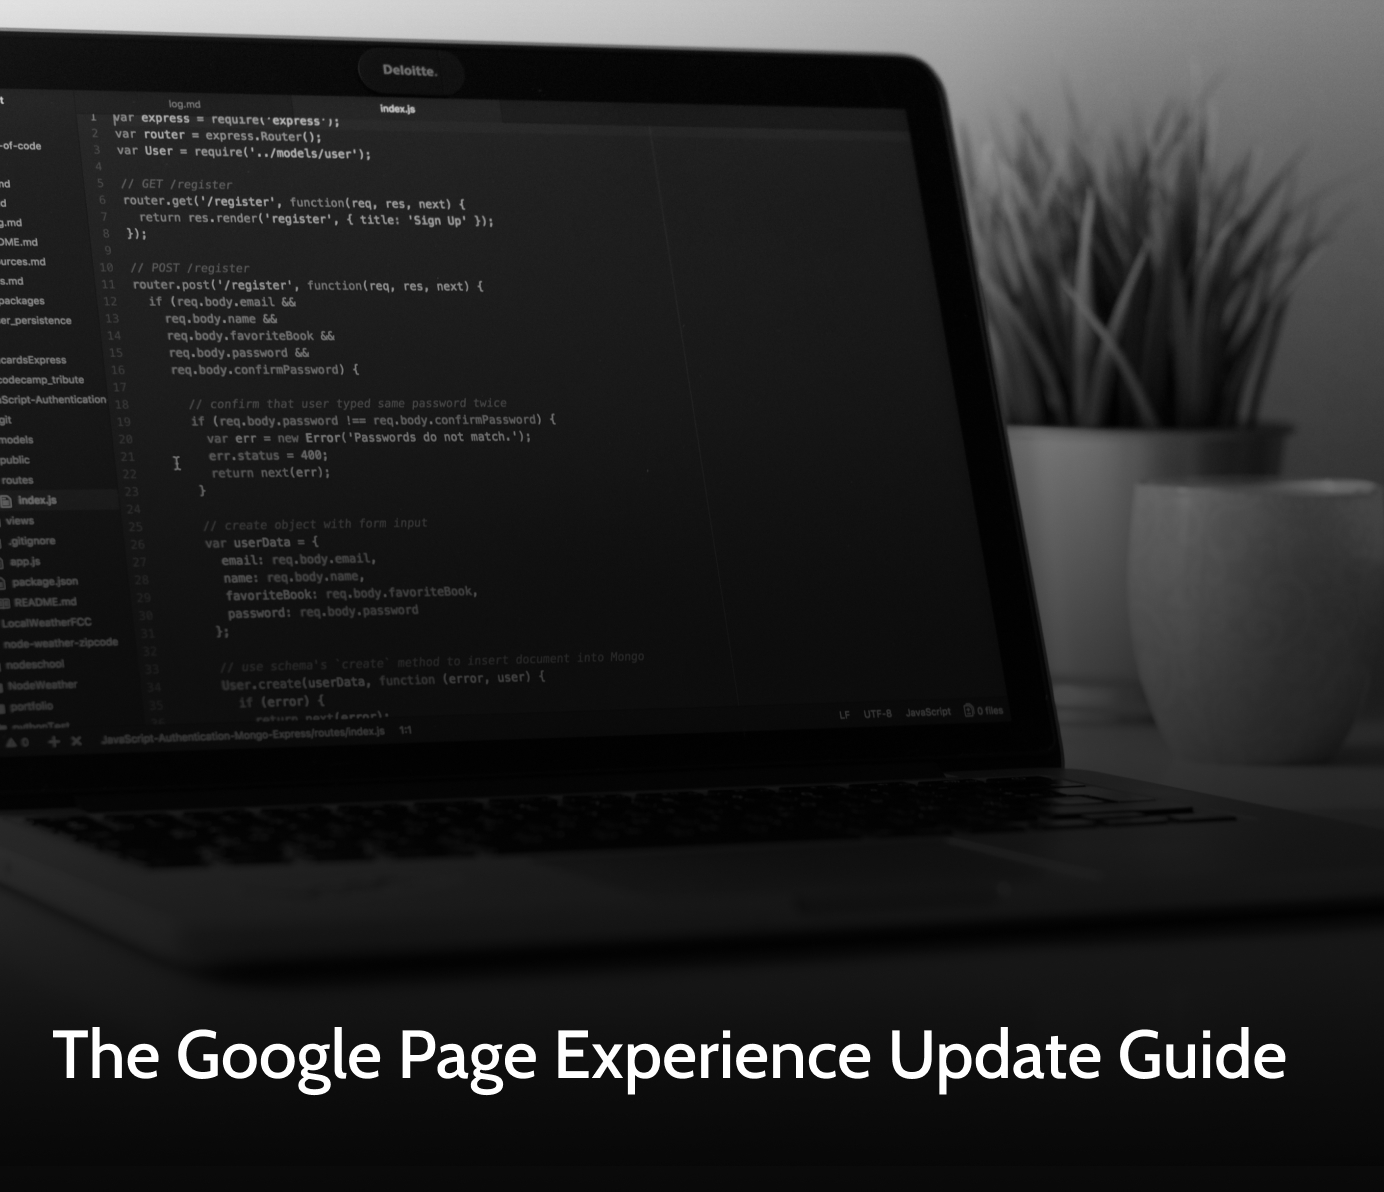 Text: The Google Page Experience Update Guide over a bg image of a computer